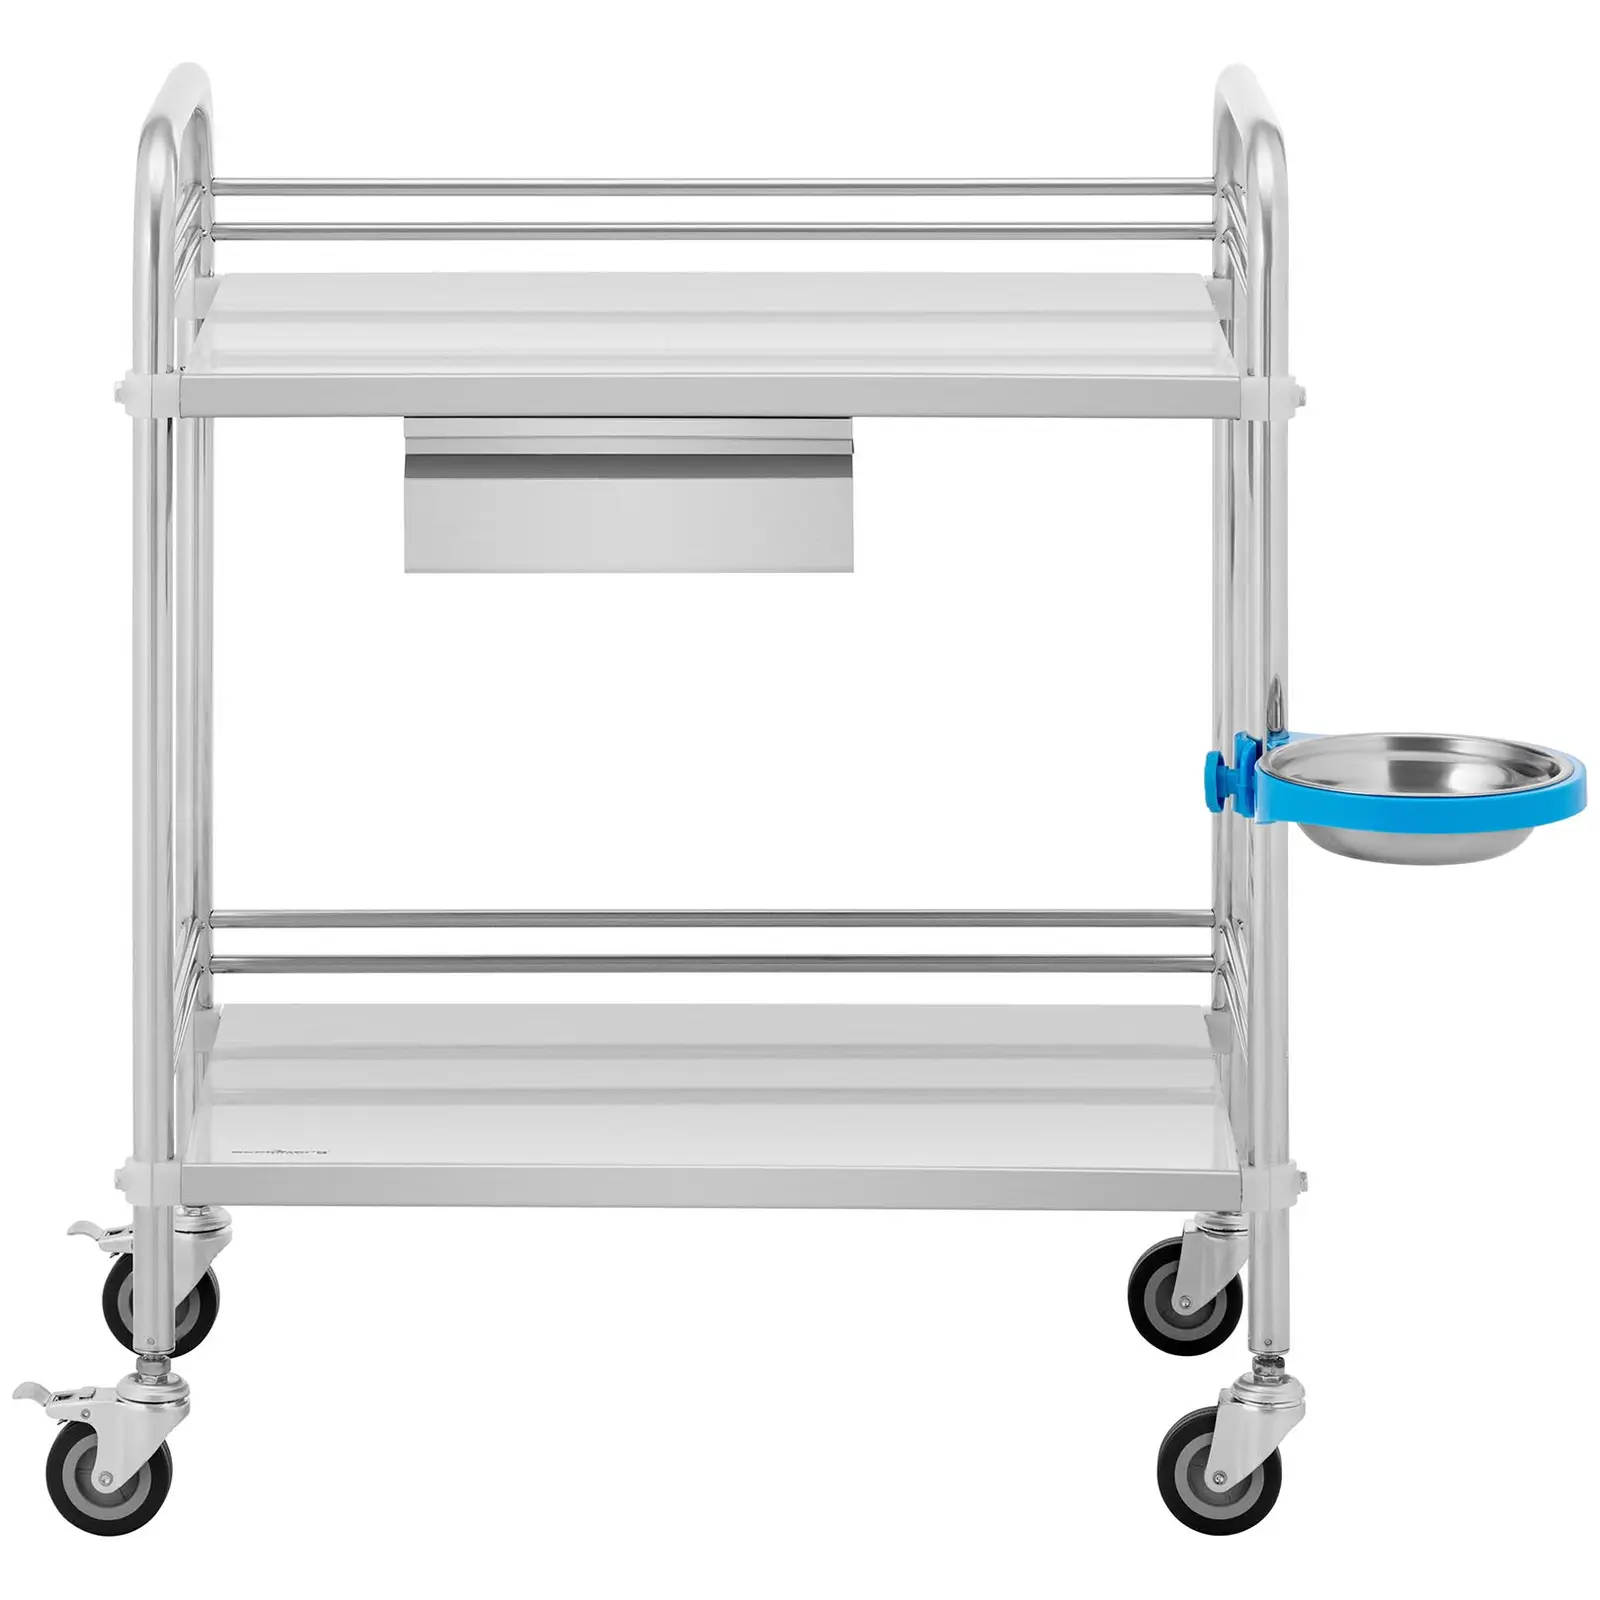 Factory second Laboratory Trolley - stainless steel - 2 shelves each 63 x 40 x 12.5 cm - 1 drawer - 20 kg